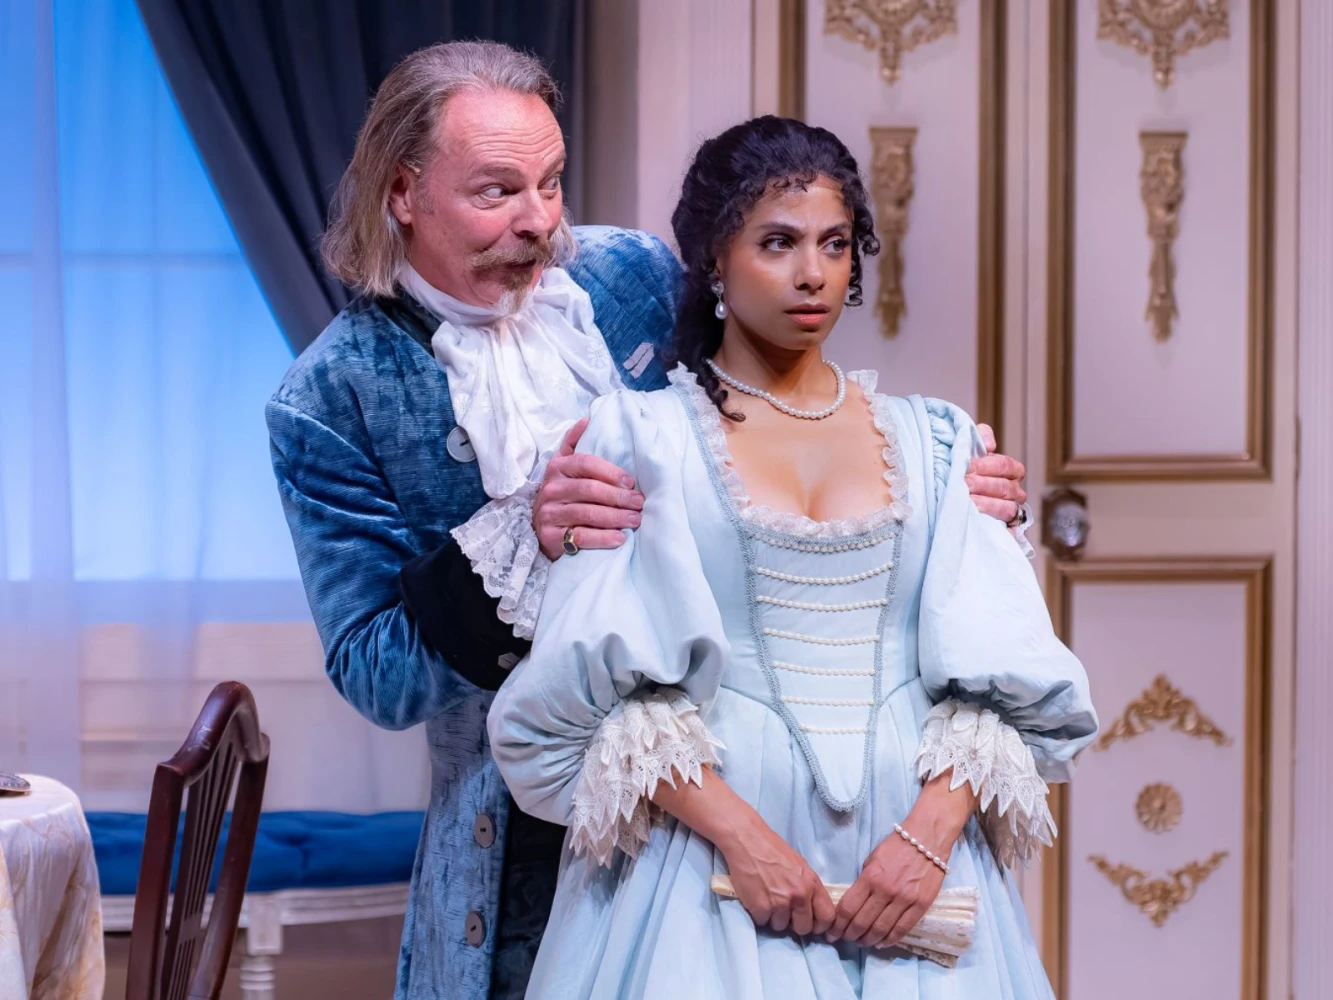 Tartuffe: What to expect - 2